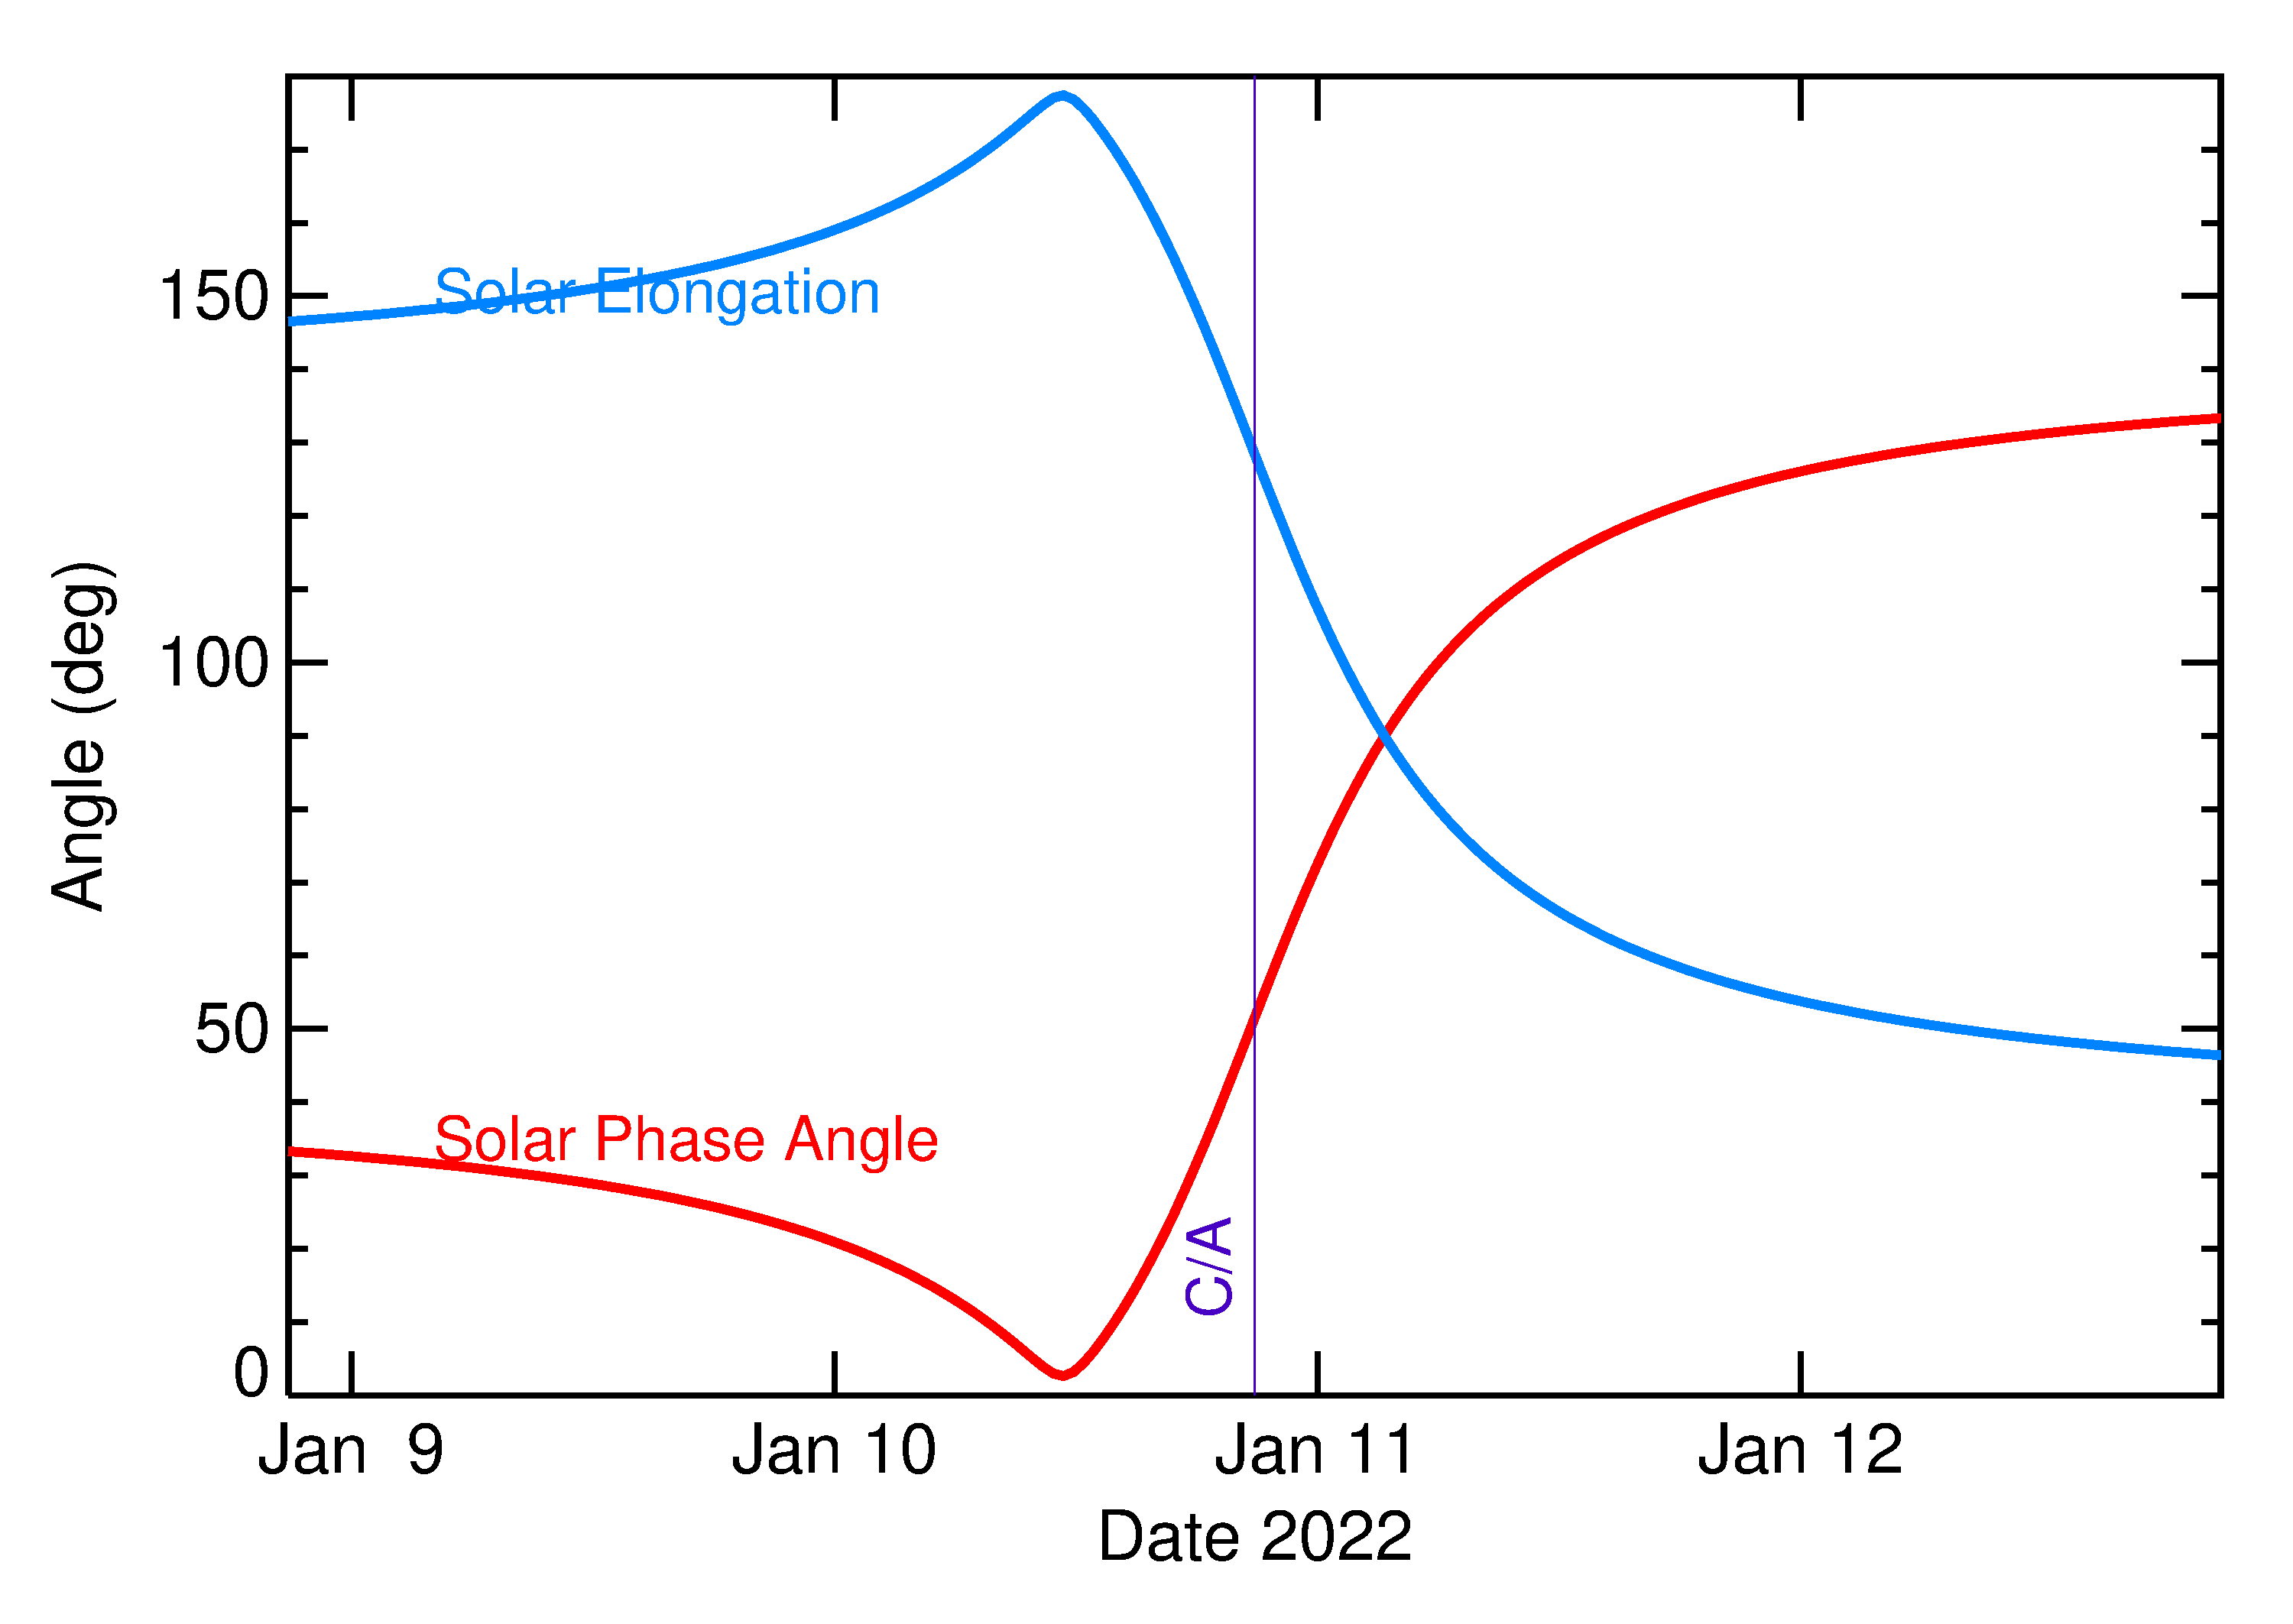 Solar Elongation and Solar Phase Angle of 2022 AC7 in the days around closest approach